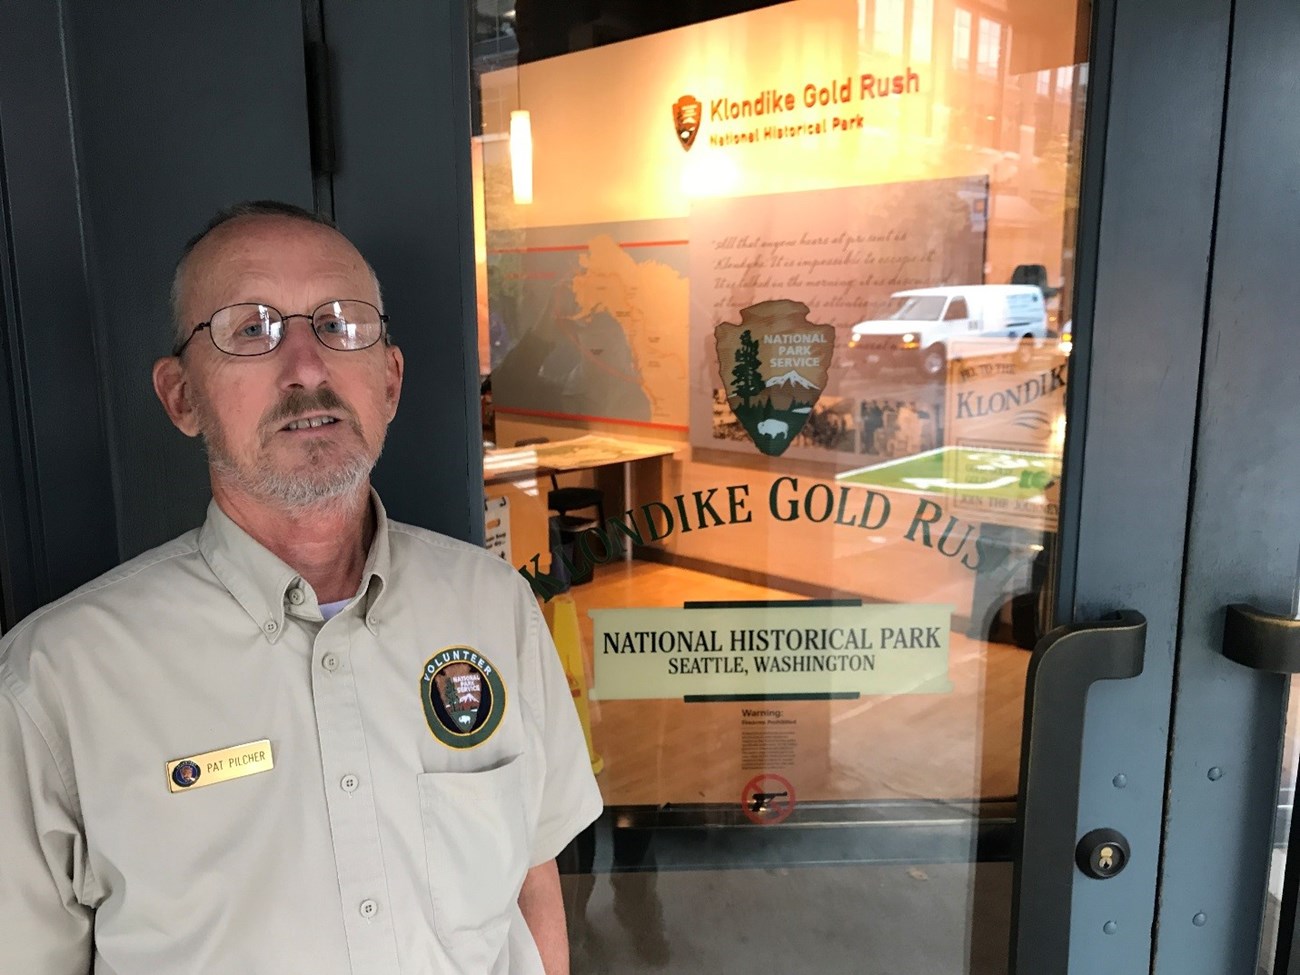 A man in a volunteer uniform poses in front of a door reading "Klondike Gold Rush"